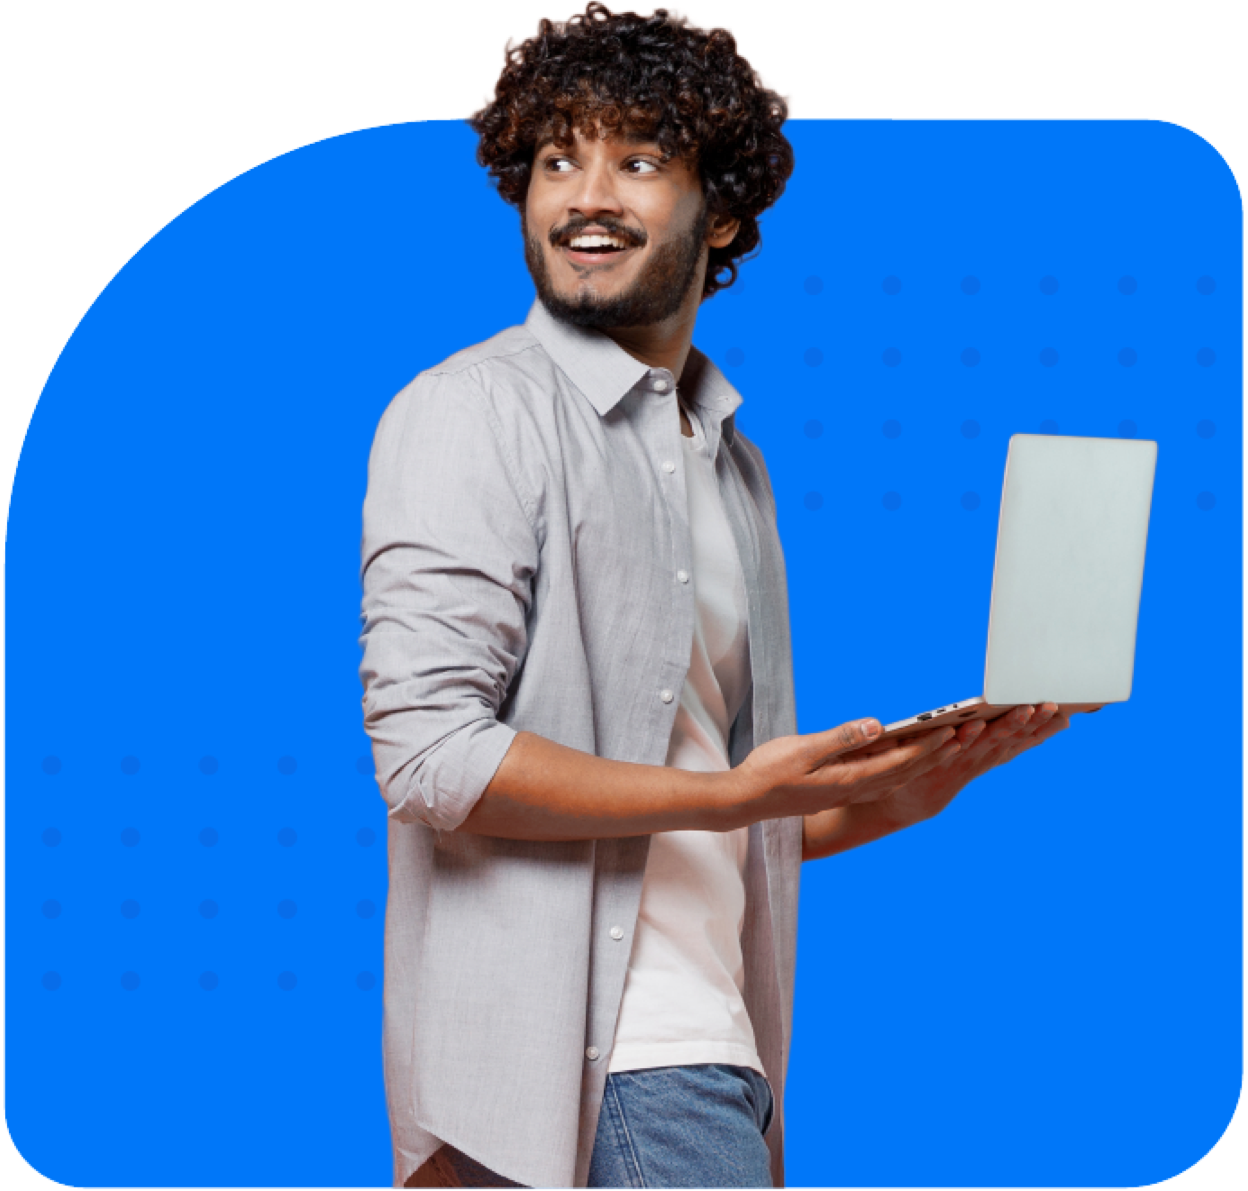 Smiling man standing up with laptop in his hands, turning his head behind with a surprised expression